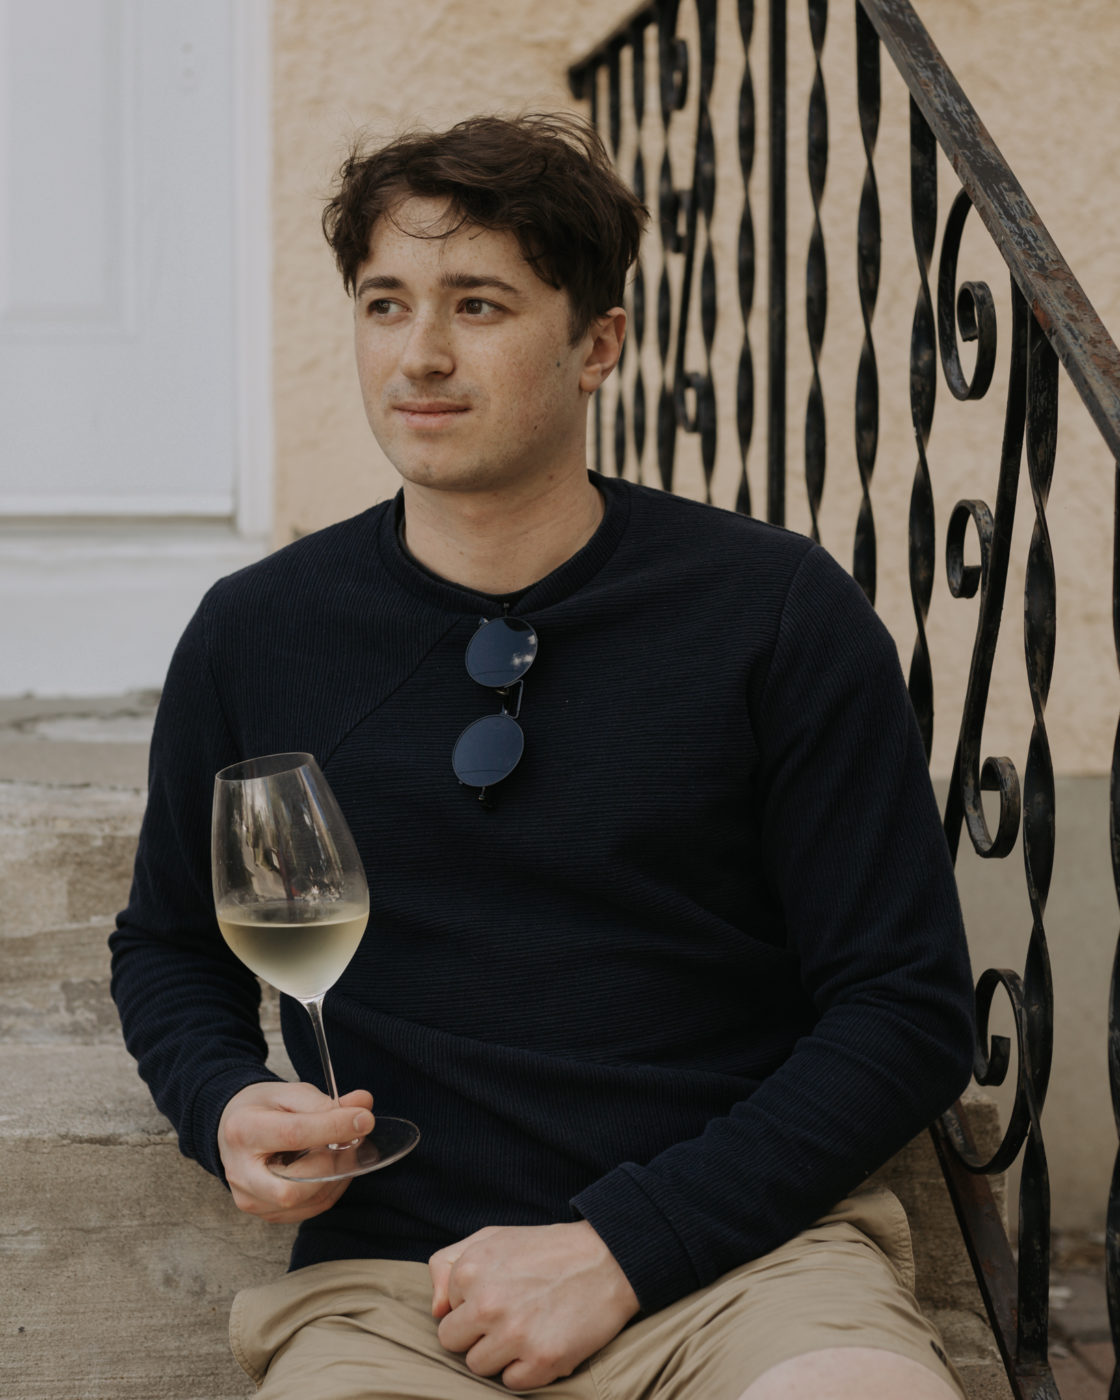 Man sitting on indoor stairs while holding a glass of white wine